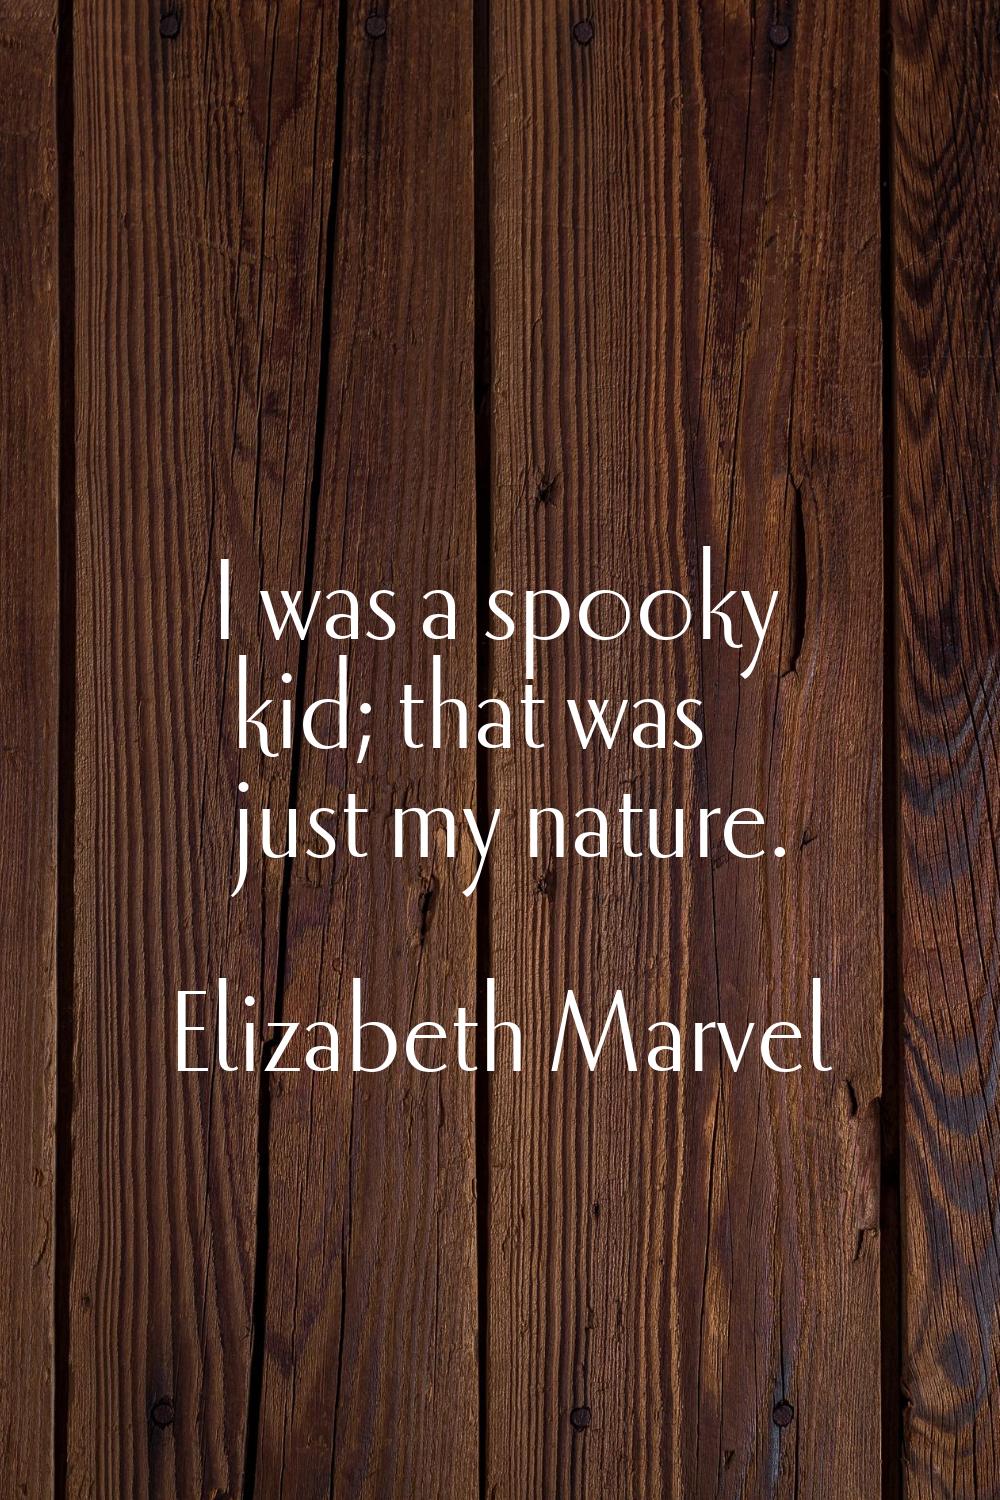 I was a spooky kid; that was just my nature.